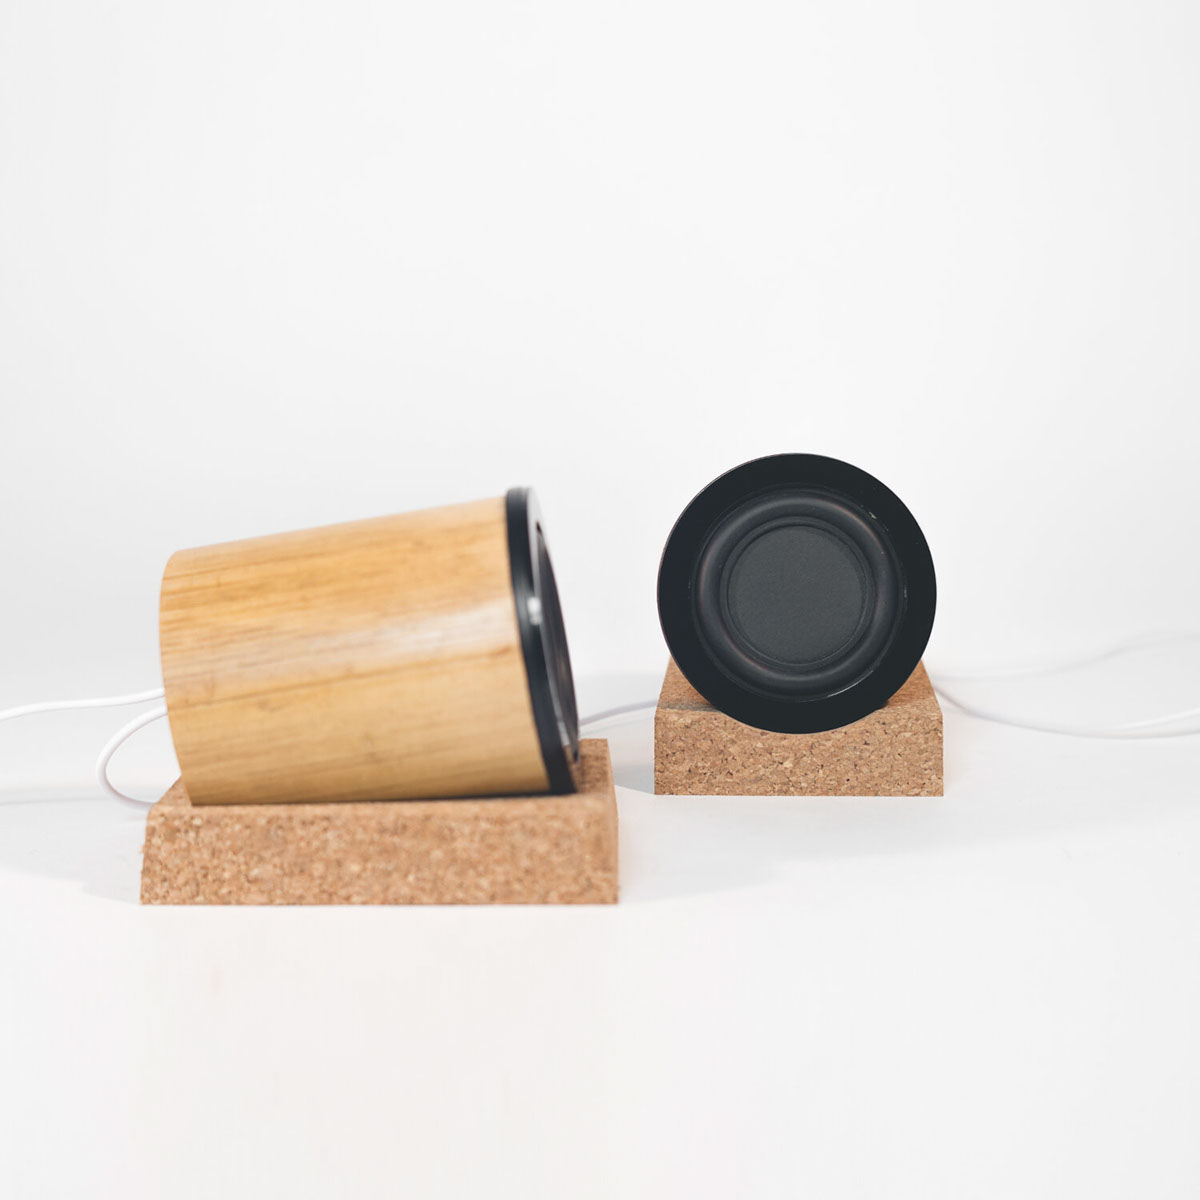 bamboo cork industrial product design manufacturing prototype concept 3D blender Fusion360 model speakers Audio sound